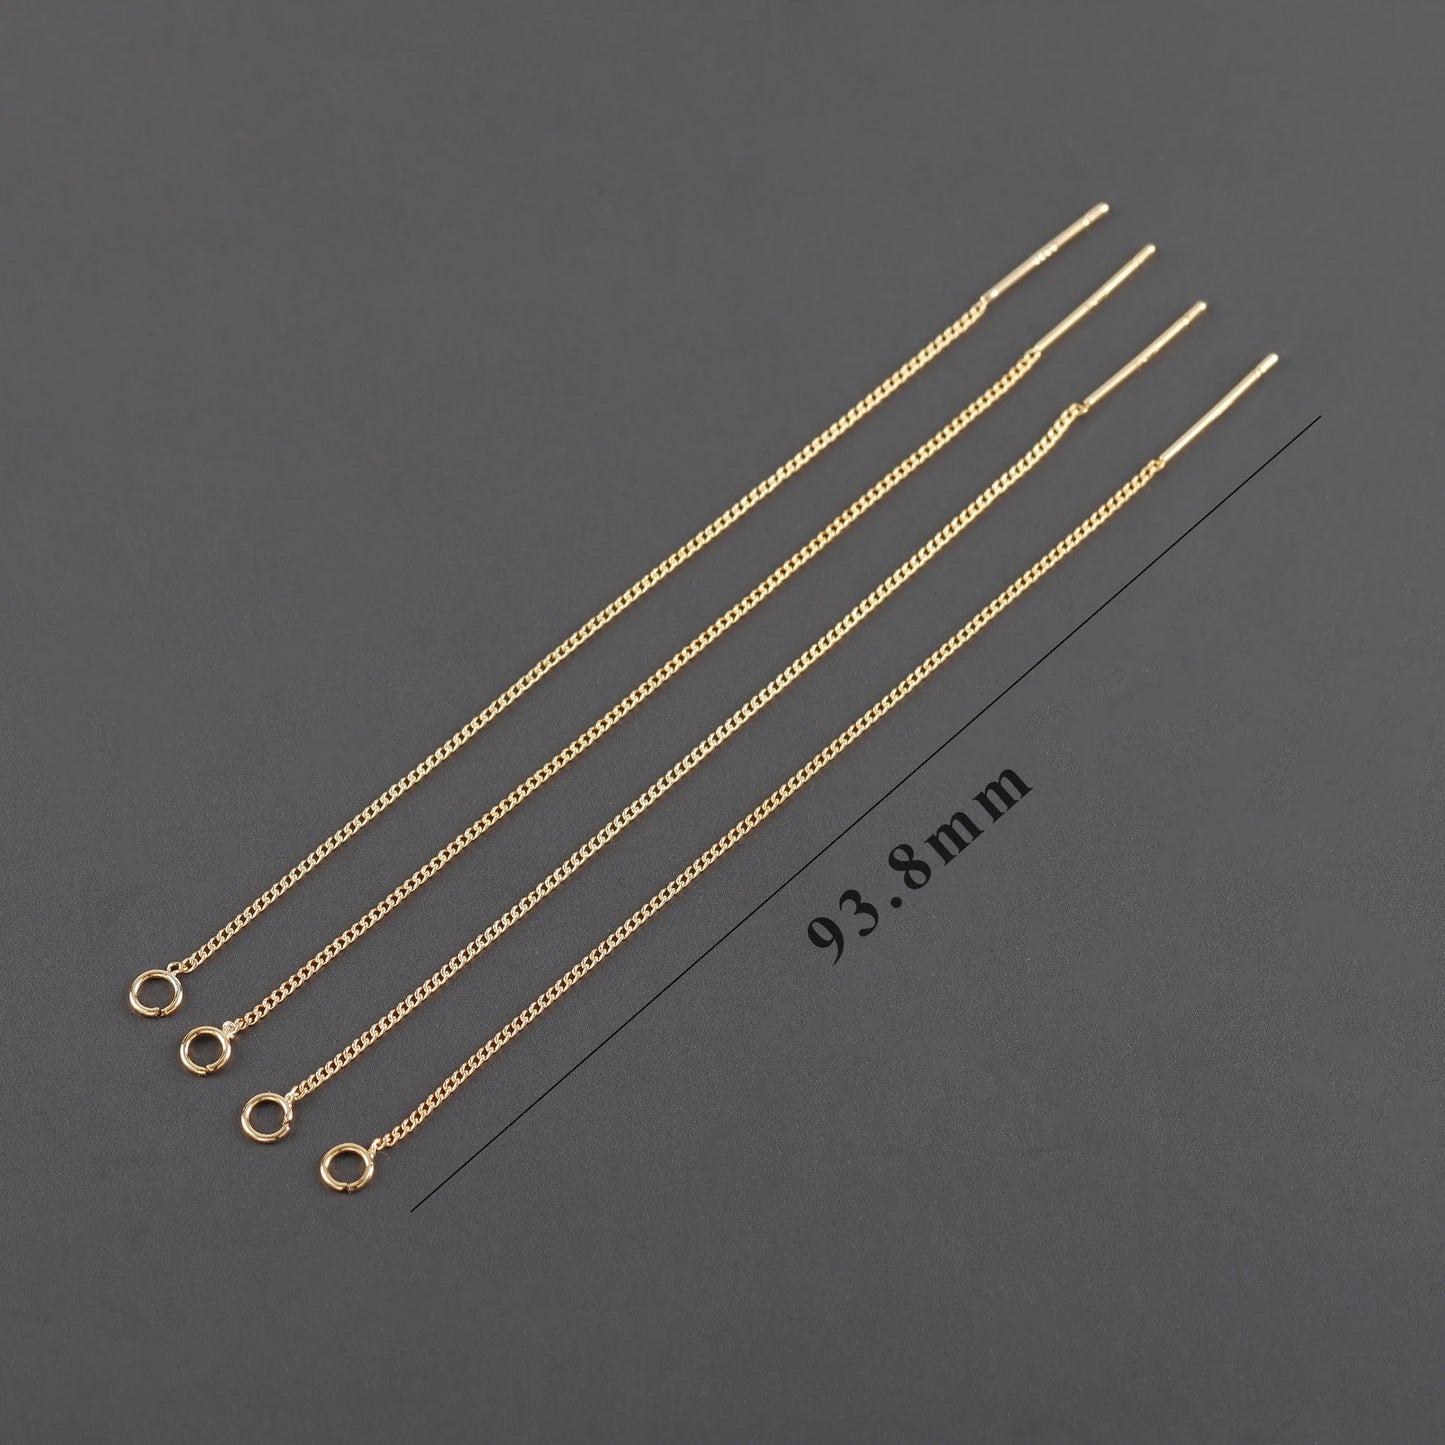 GUFEATHER M1078,jewelry accessories,pass REACH,nickel free,18k gold rhodium plated,copper,charms,diy jewelry making,20pcs/lot